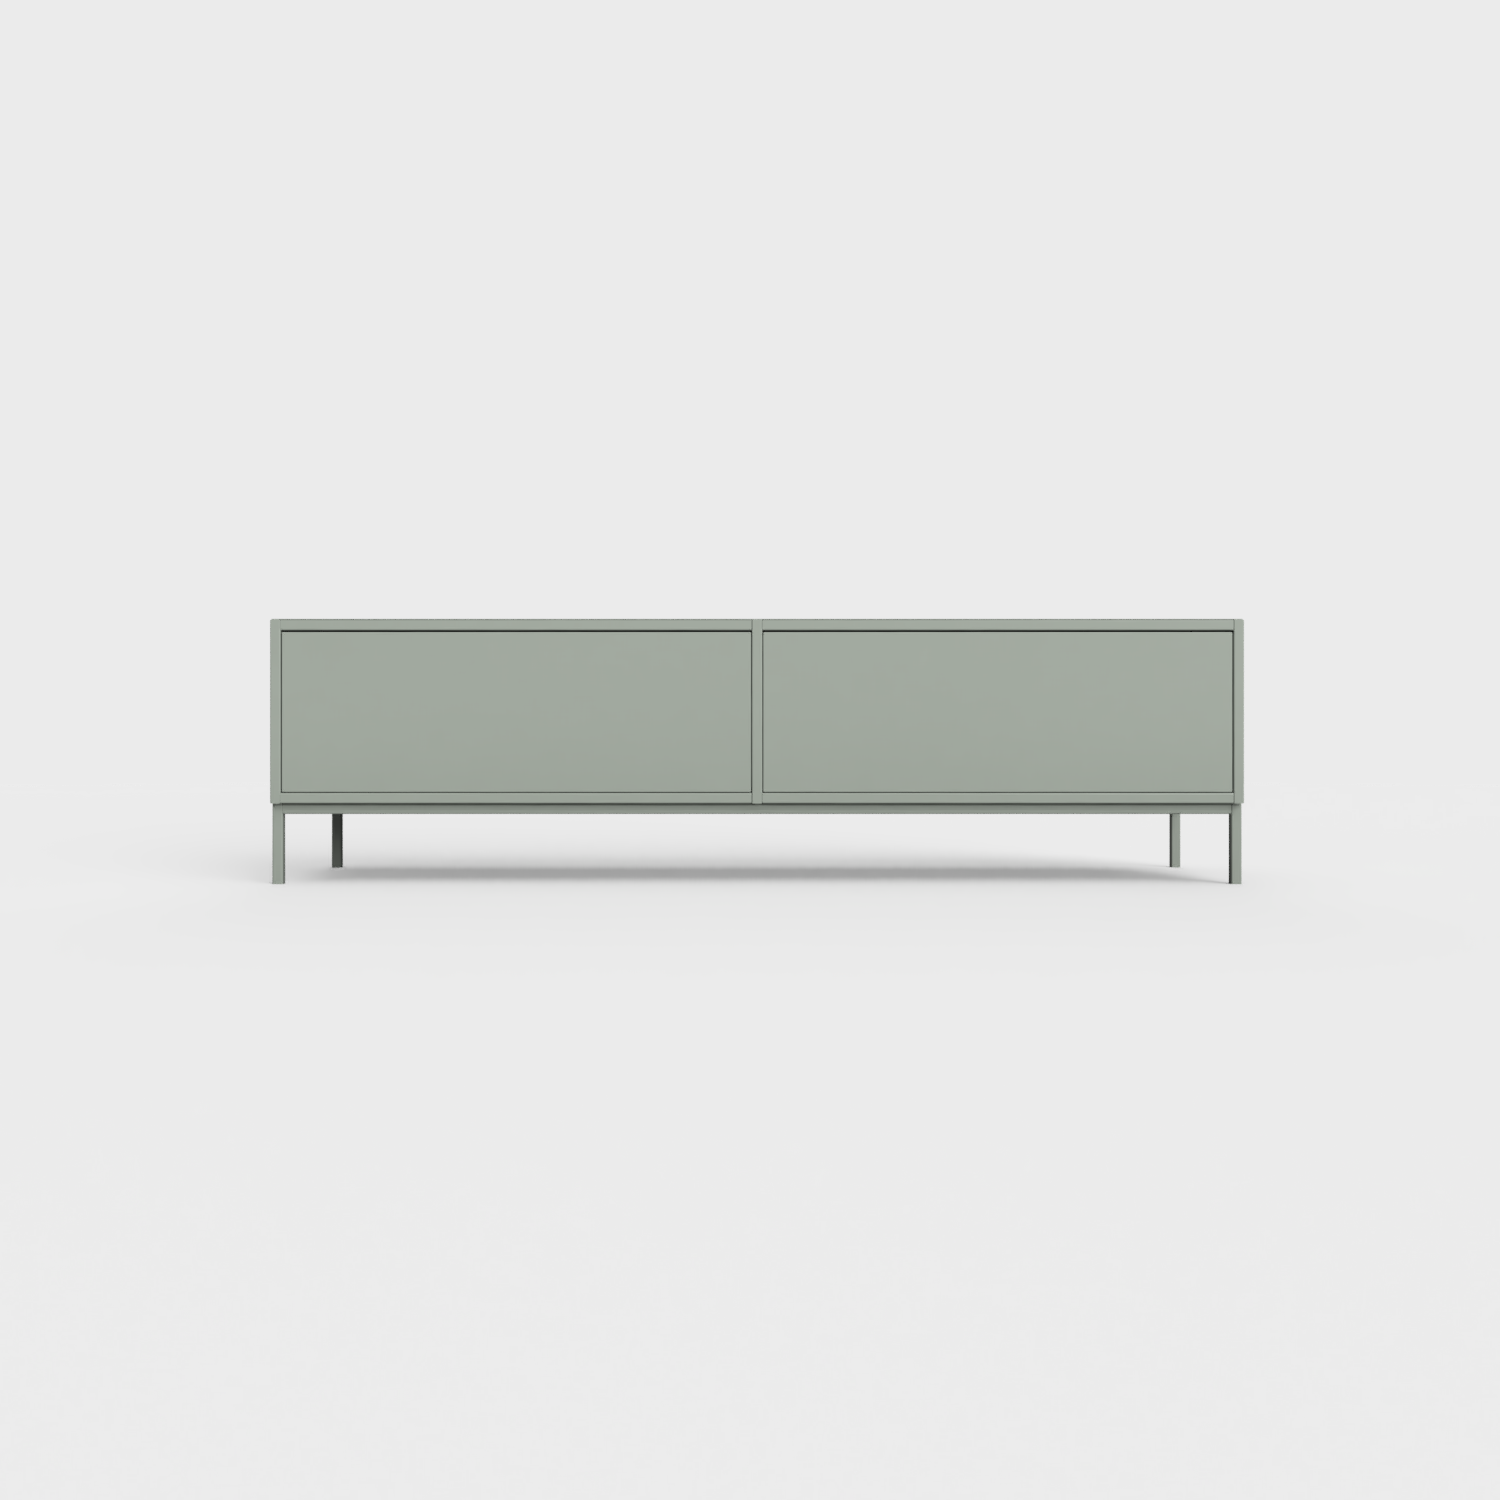 Prunus 01 Lowboard in Dark Matcha Green color, powder-coated steel, elegant and modern piece of furniture for your living room